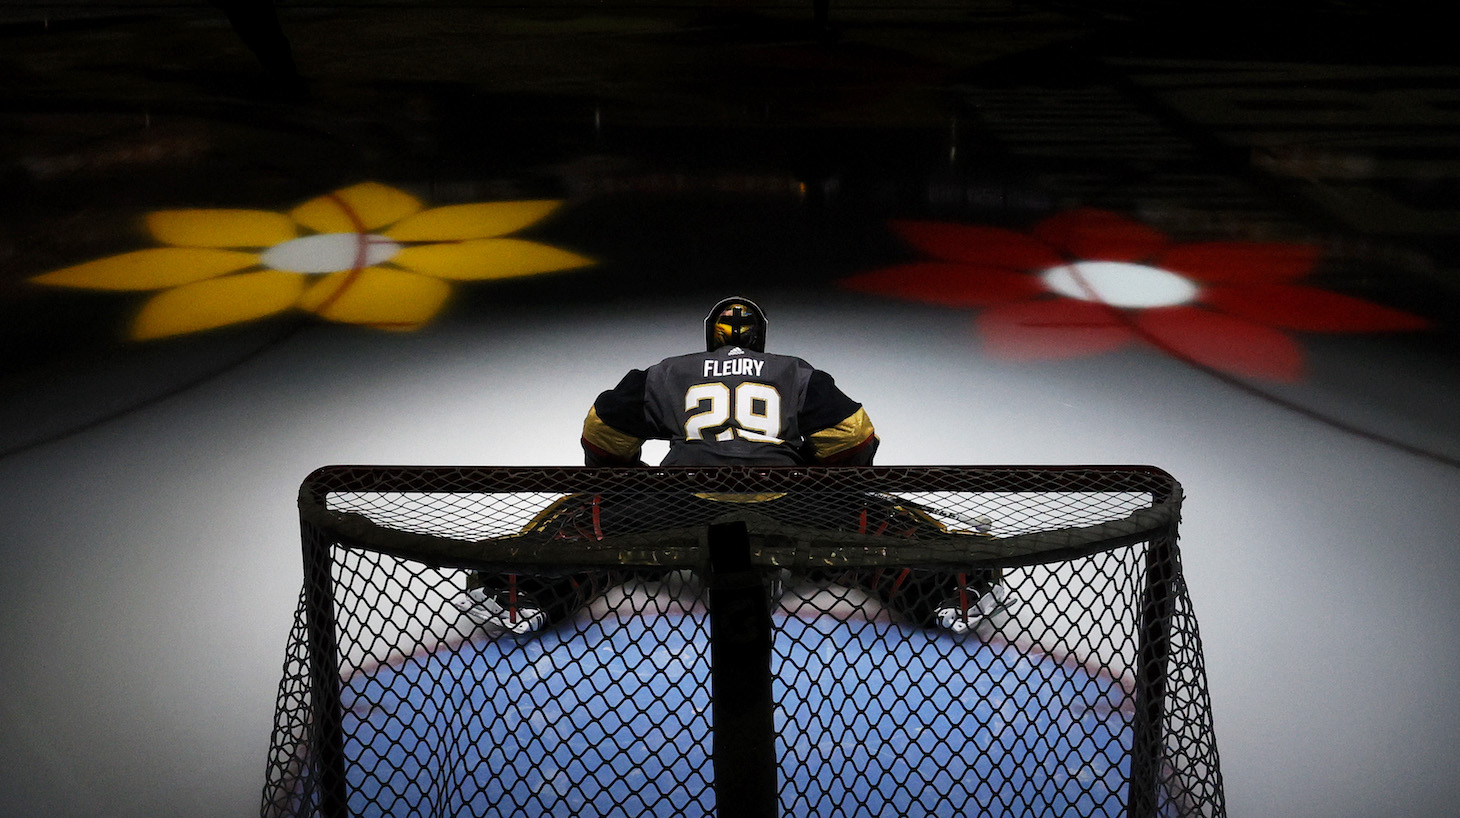 LAS VEGAS, NEVADA - JUNE 22: Marc-Andre Fleury #29 of the Vegas Golden Knights is introduced before Game Five of the Stanley Cup Semifinals during the 2021 Stanley Cup Playoffs against the Montreal Canadiens at T-Mobile Arena on June 22, 2021 in Las Vegas, Nevada. The Canadiens defeated the Golden Knights 4-1. (Photo by Ethan Miller/Getty Images)